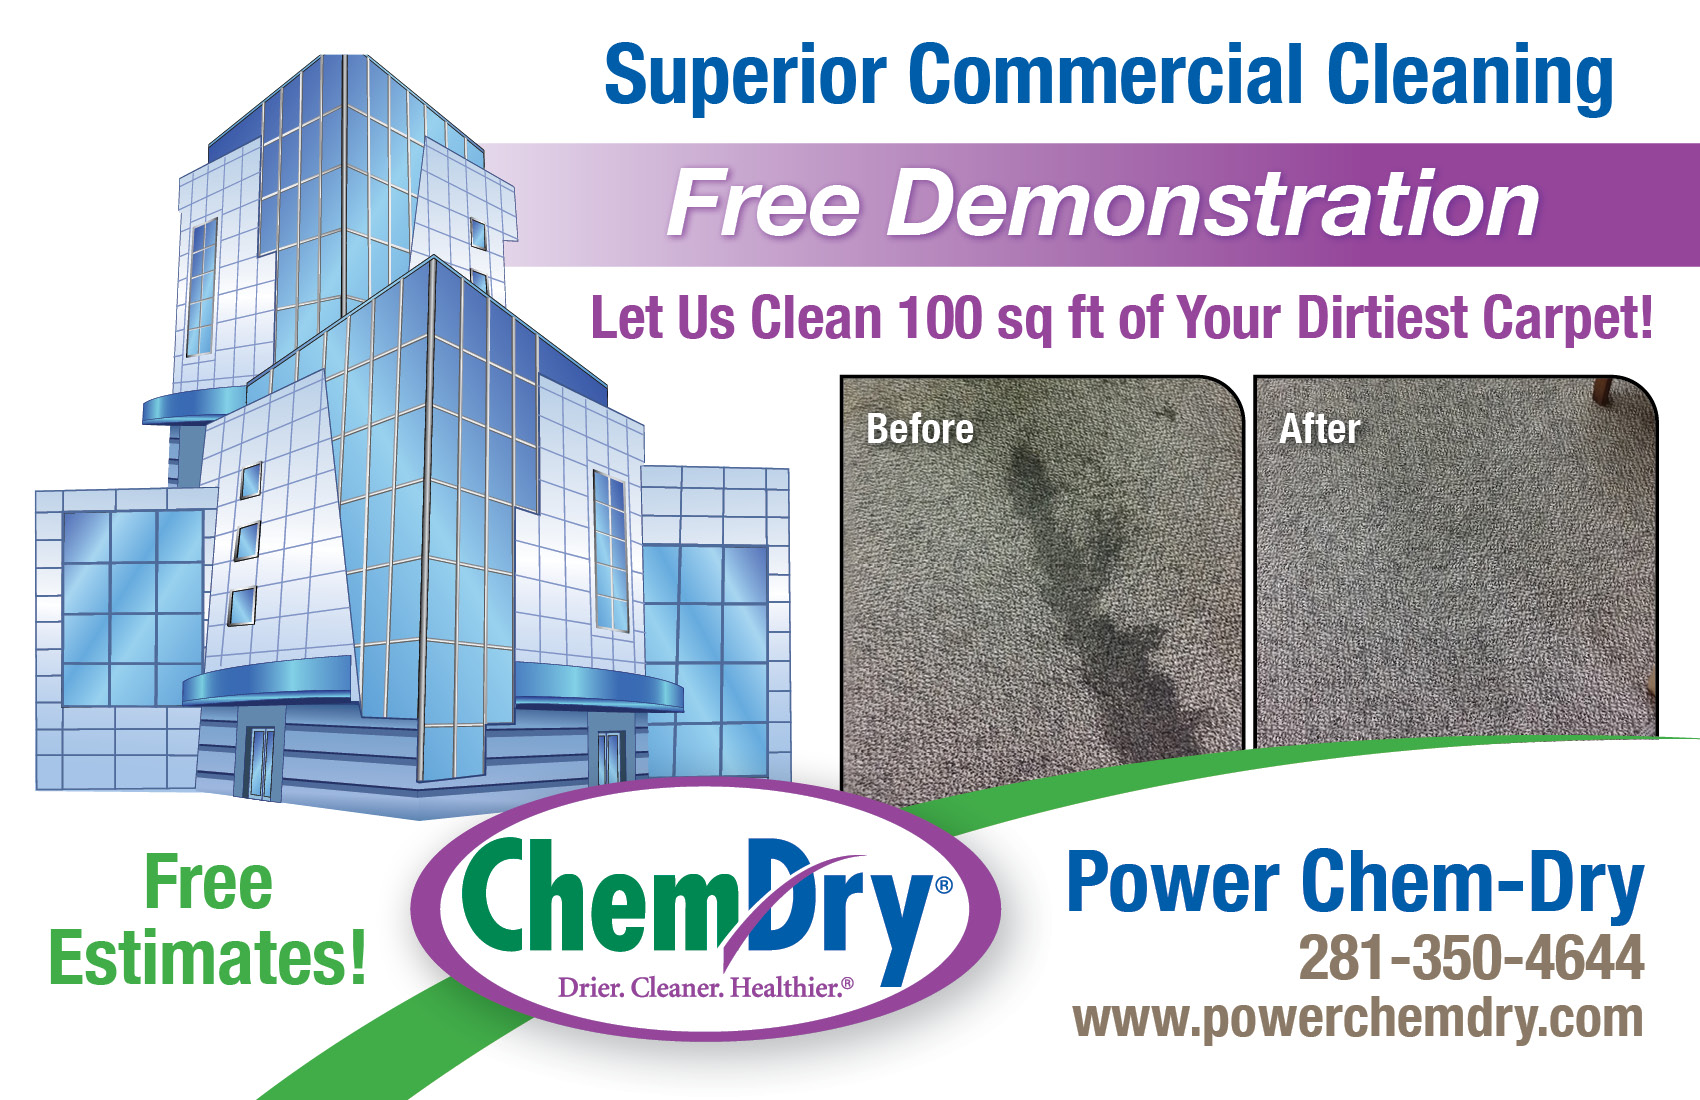 Power Chem-Dry provides Commercial Cleaning Services in Spring, Texas